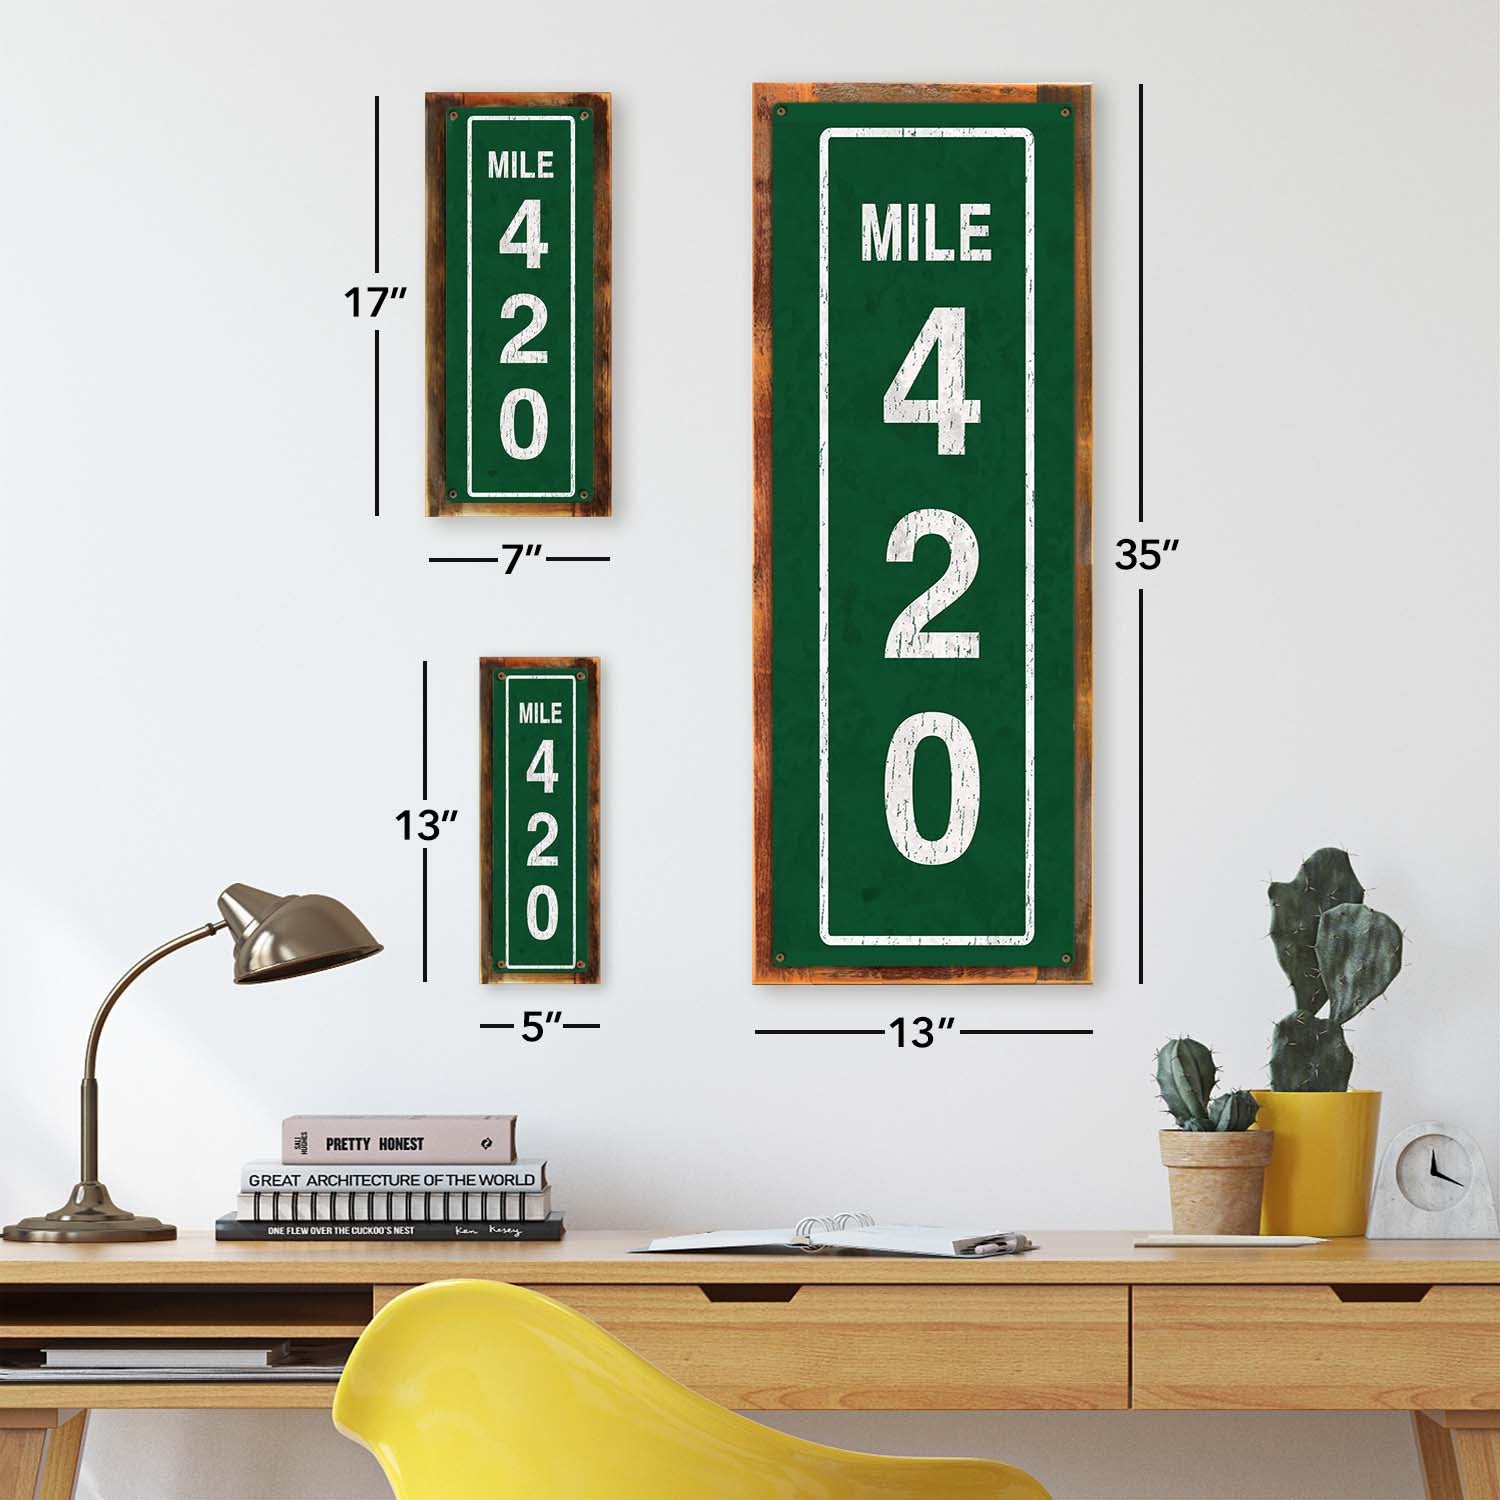 Photo showing relative proportions of different framed product sizes